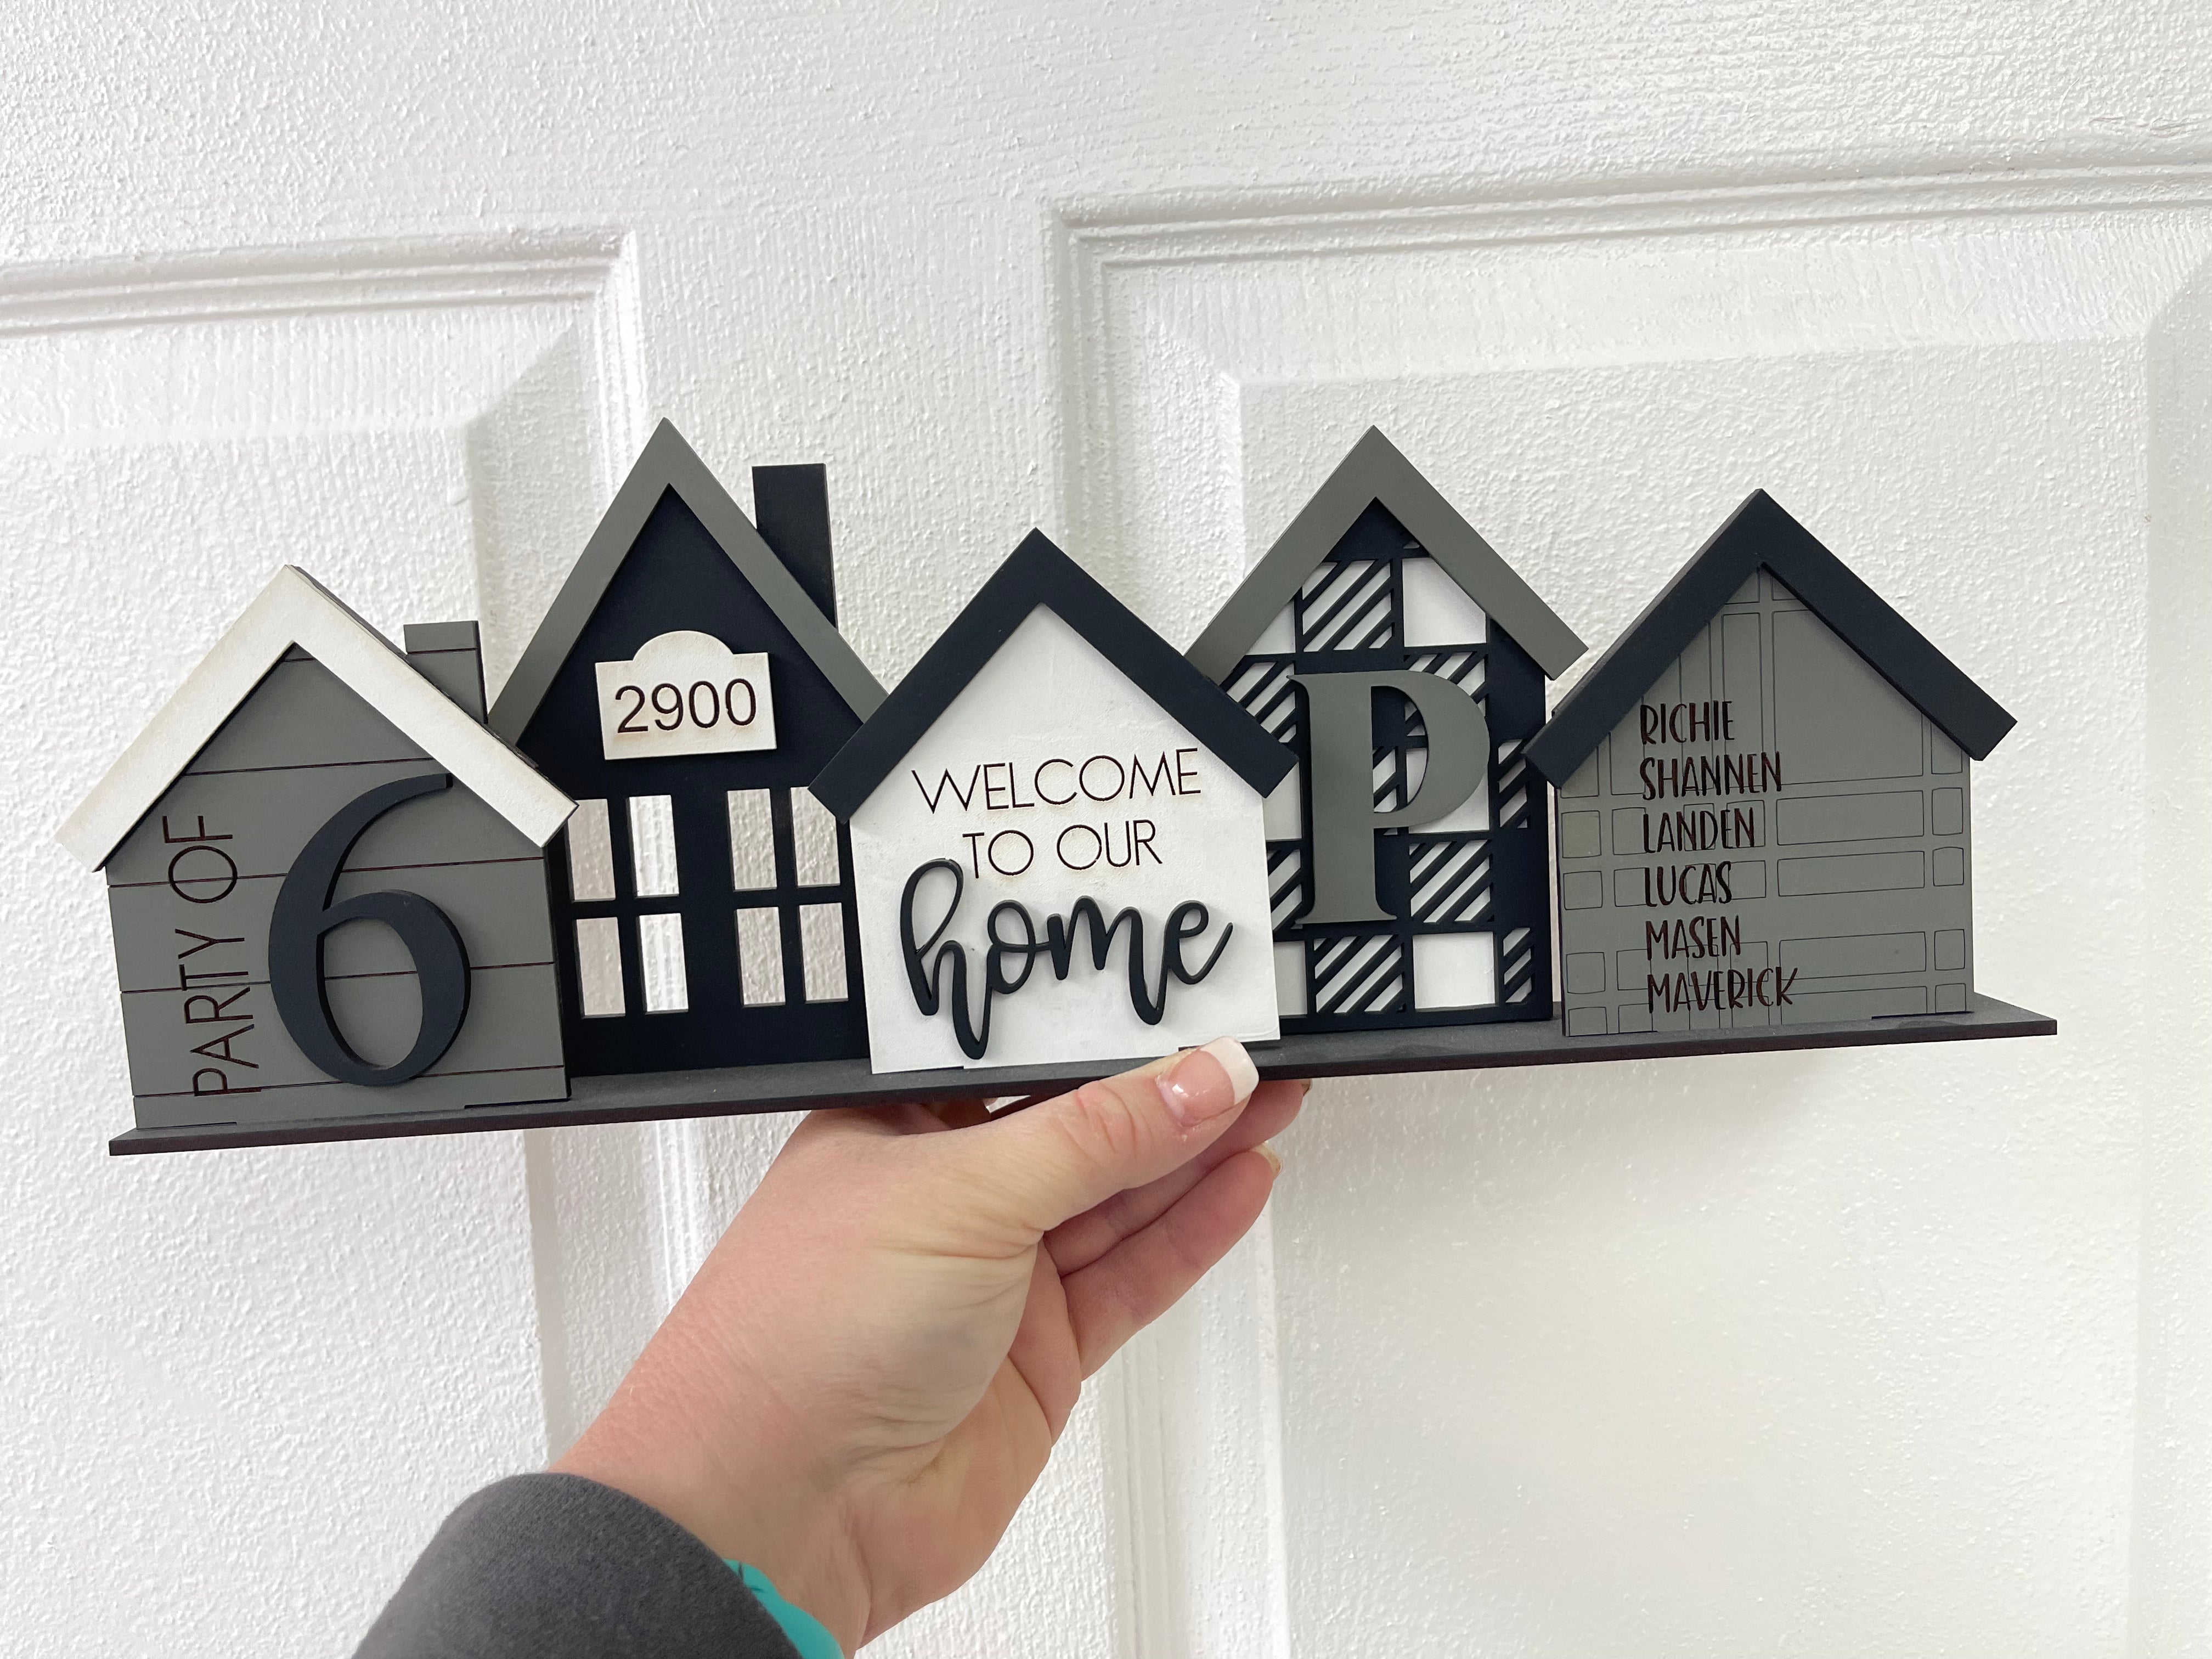 Set of 5 Personalized Houses Mantle Decor